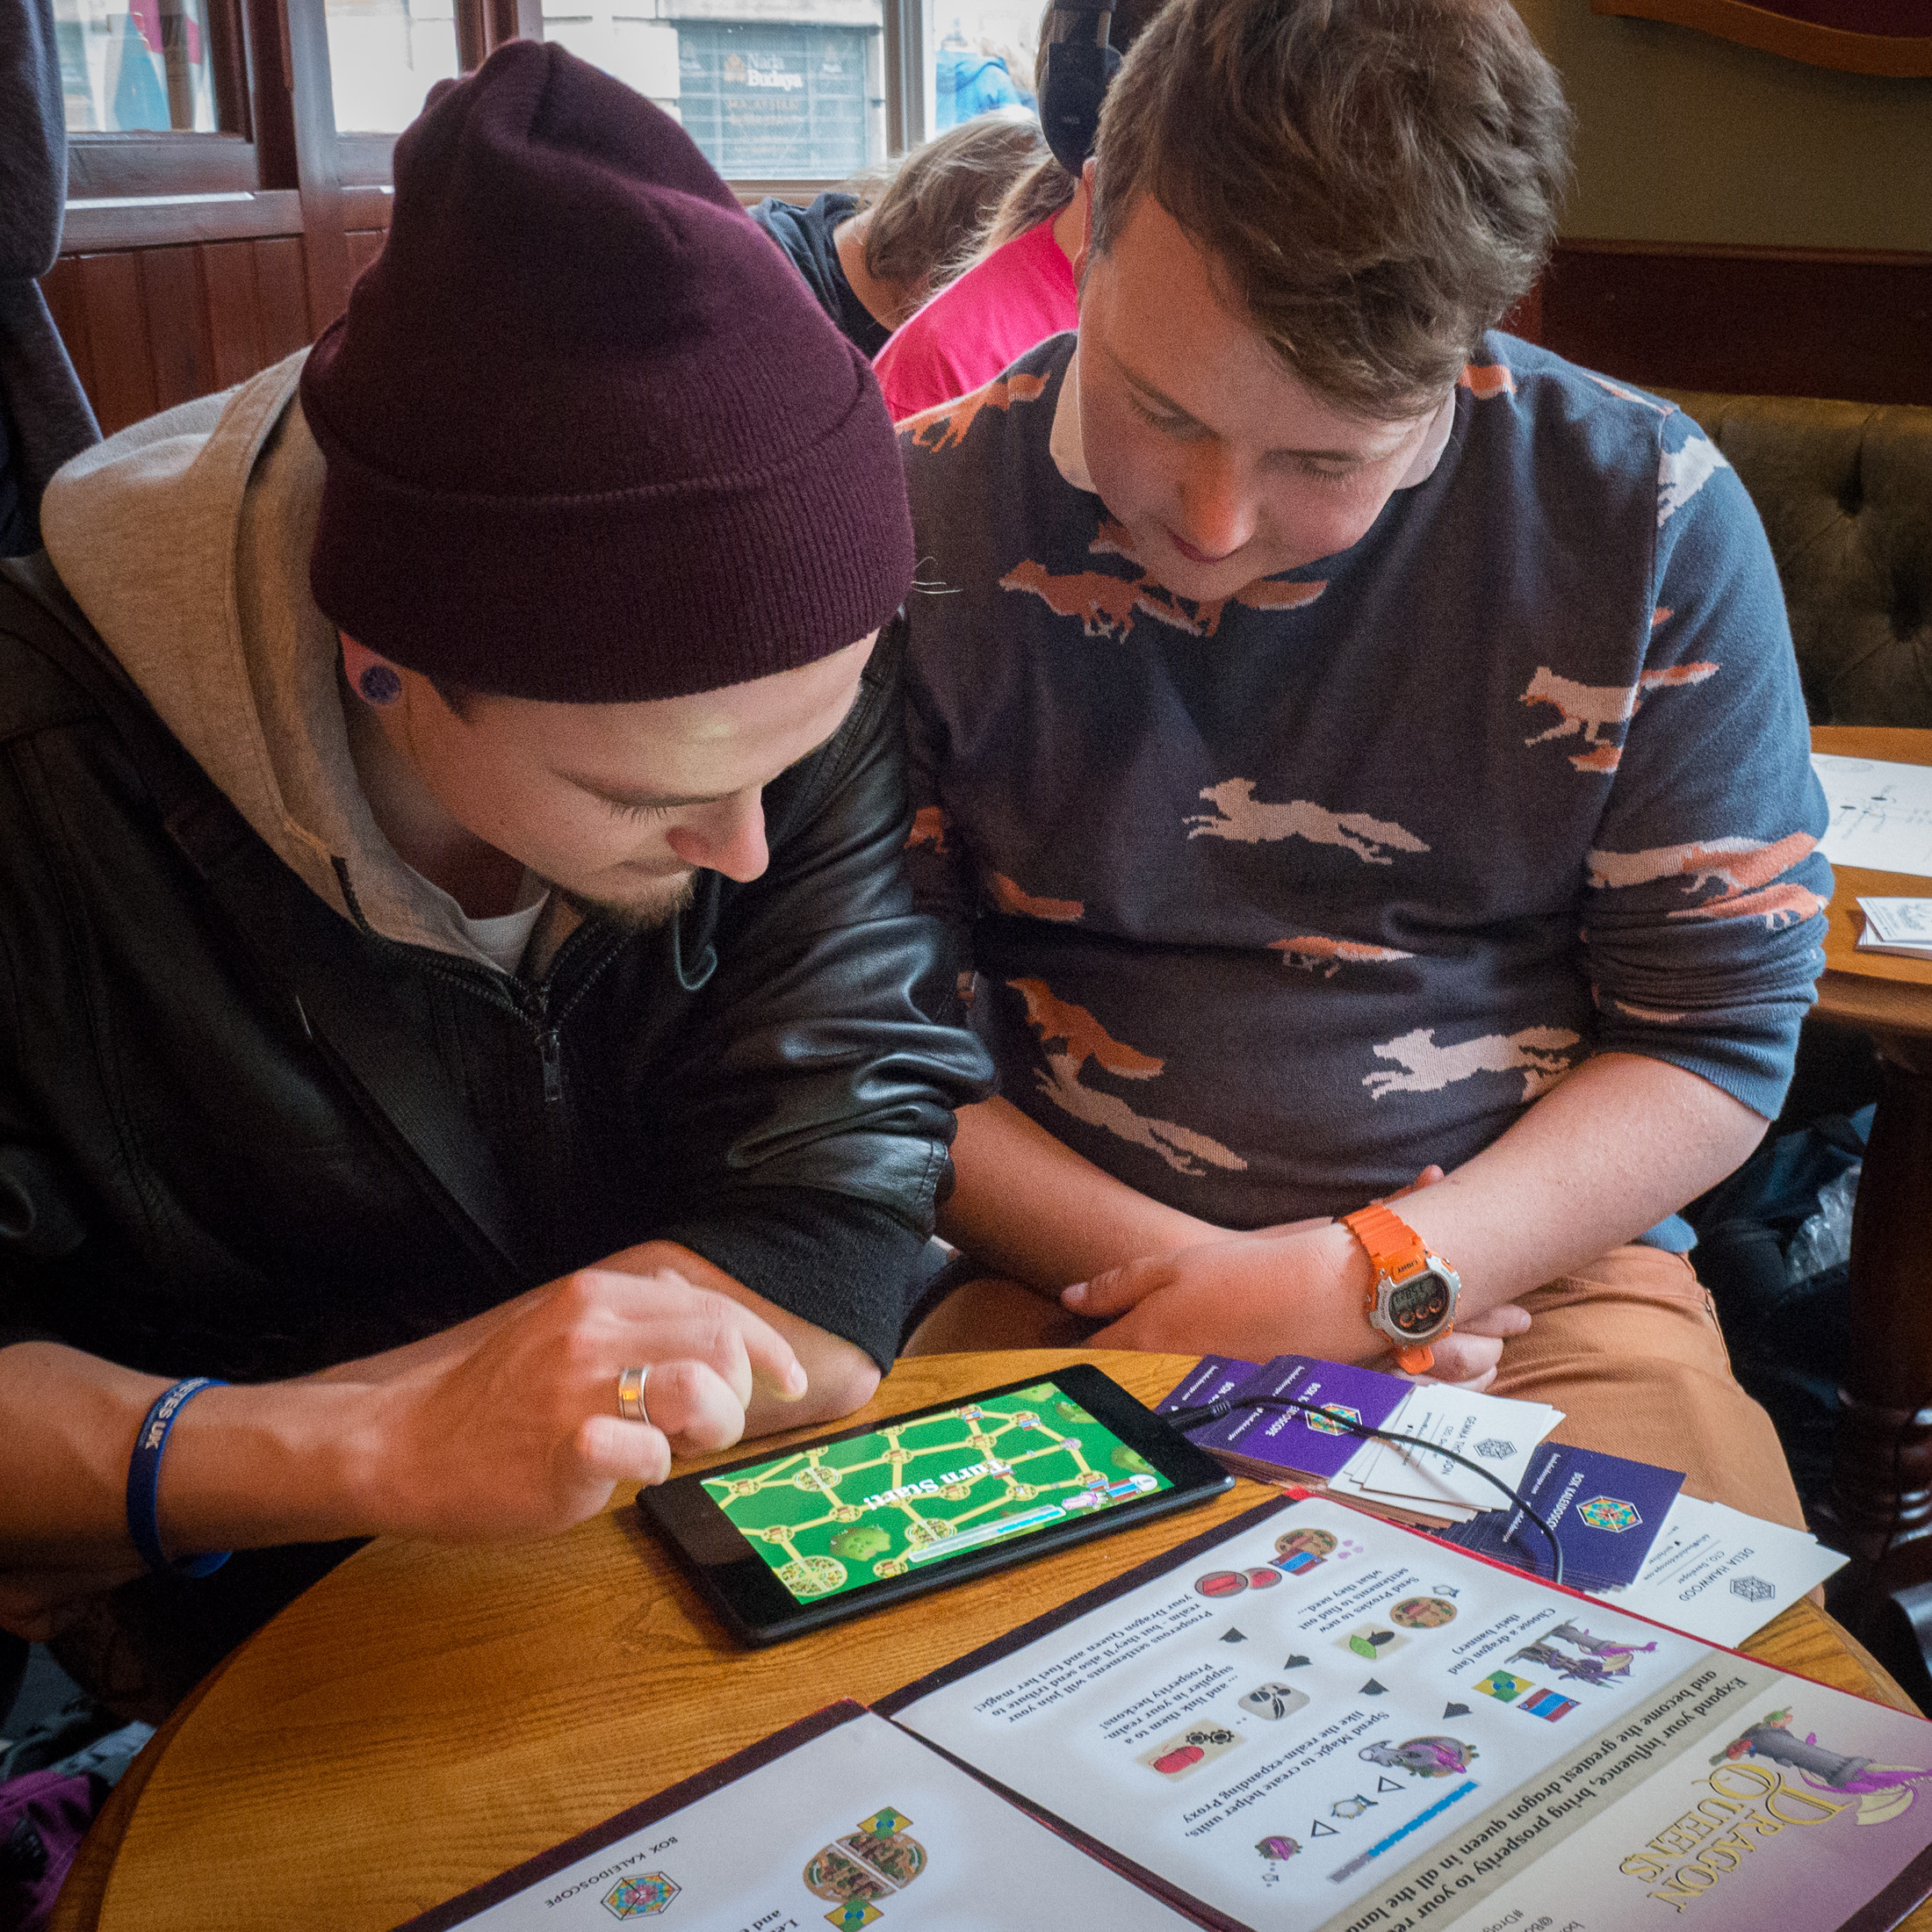 Two players at our booth, with a printed game guide visible on the table. One sits poised above the tablet, about to take their turn, while the other player observes.